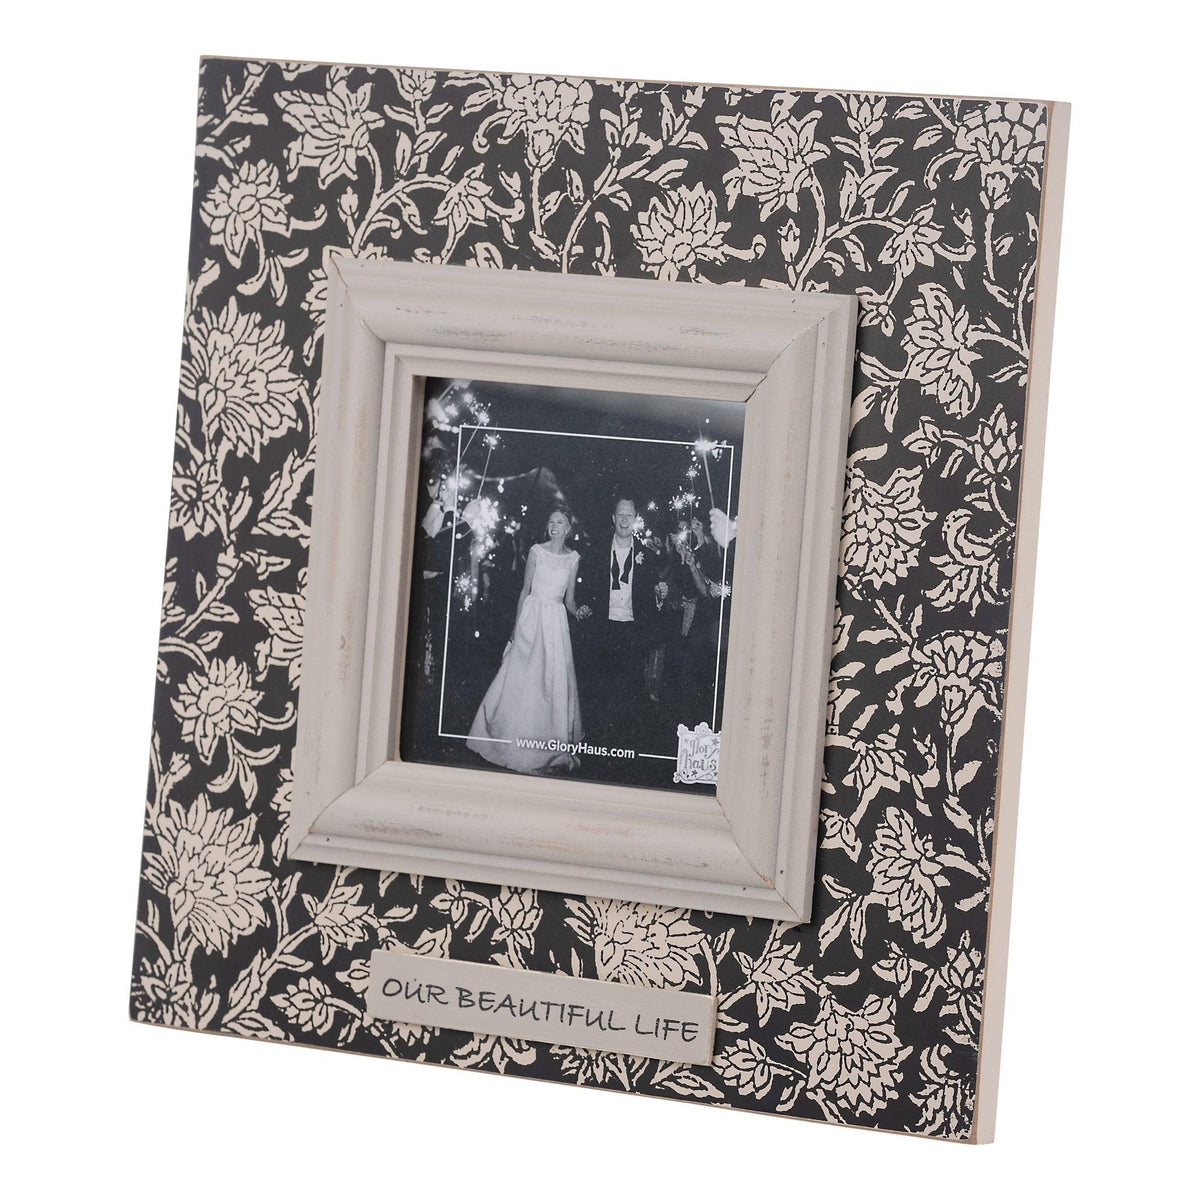 Our Beautiful Life Frame - GLORY HAUS 